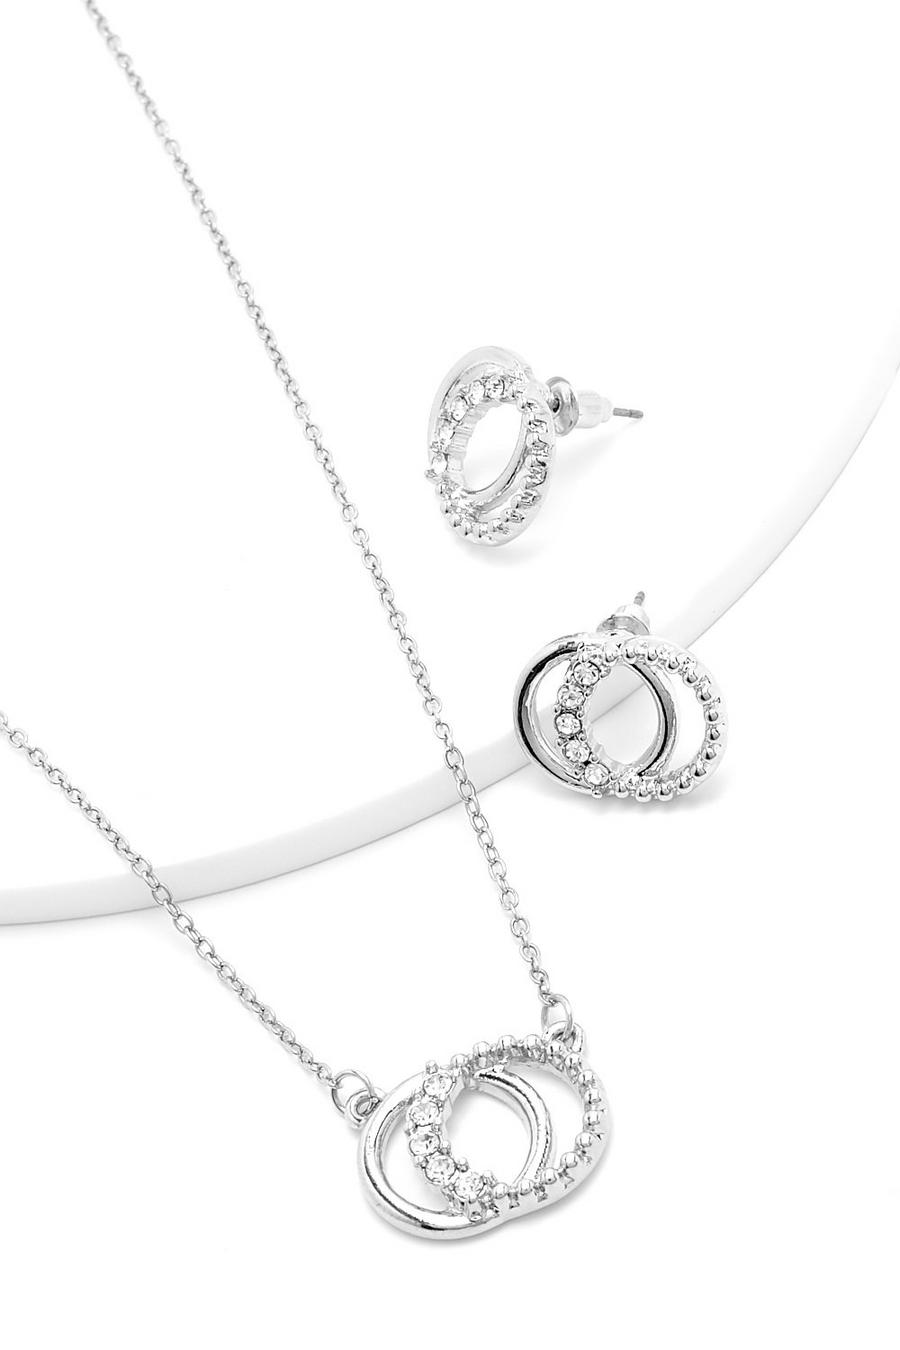 Silver Links Necklace And Earring Set 